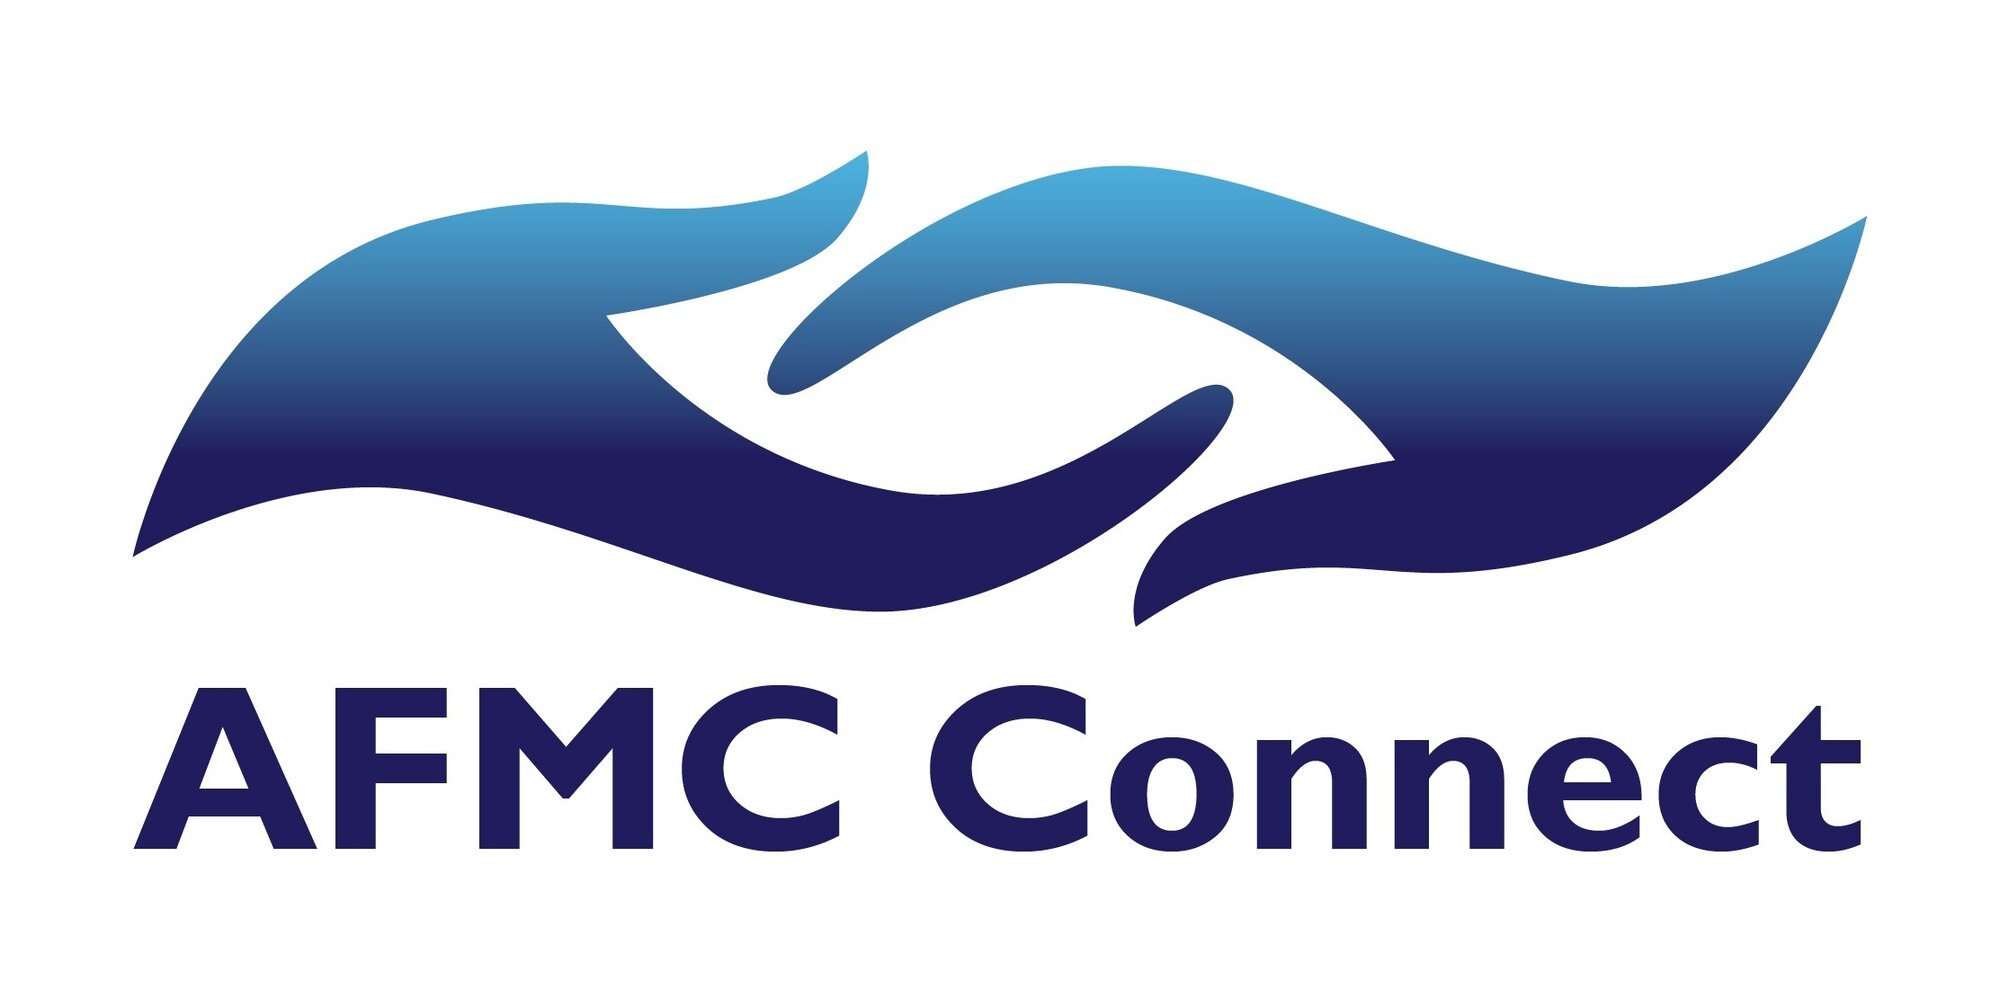 AFMC Connect provides units and leaders with the time, tools and resources to foster a culture of continual communication, building resilient military and civilian Airmen able to operate at optimal levels as they aim for personal and professional success.